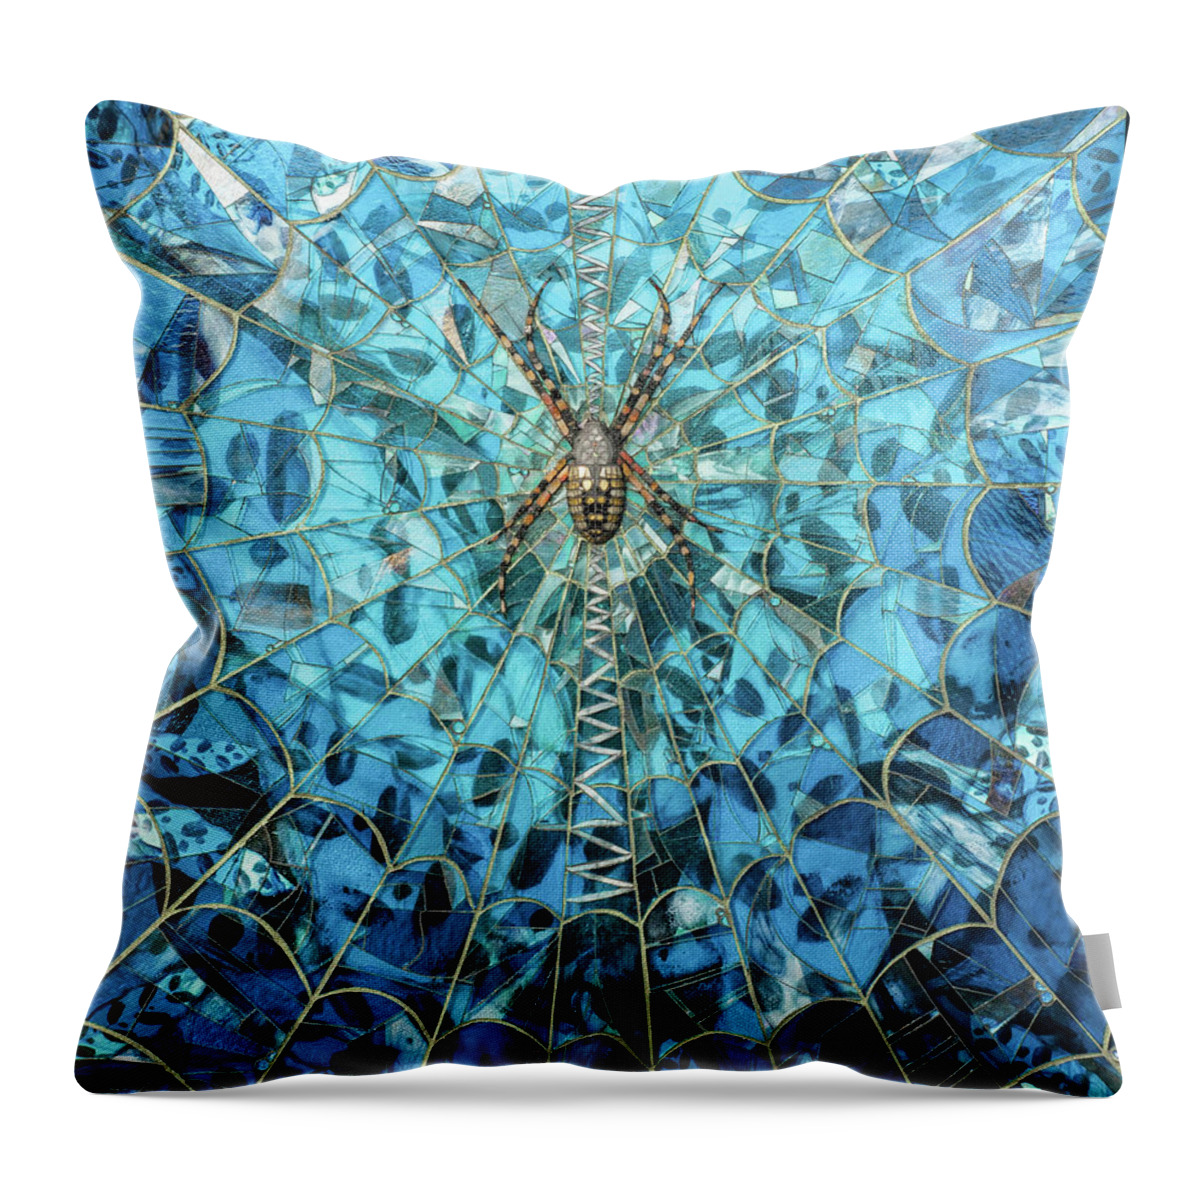 Spider Throw Pillow featuring the glass art The Guardian by Cherie Bosela